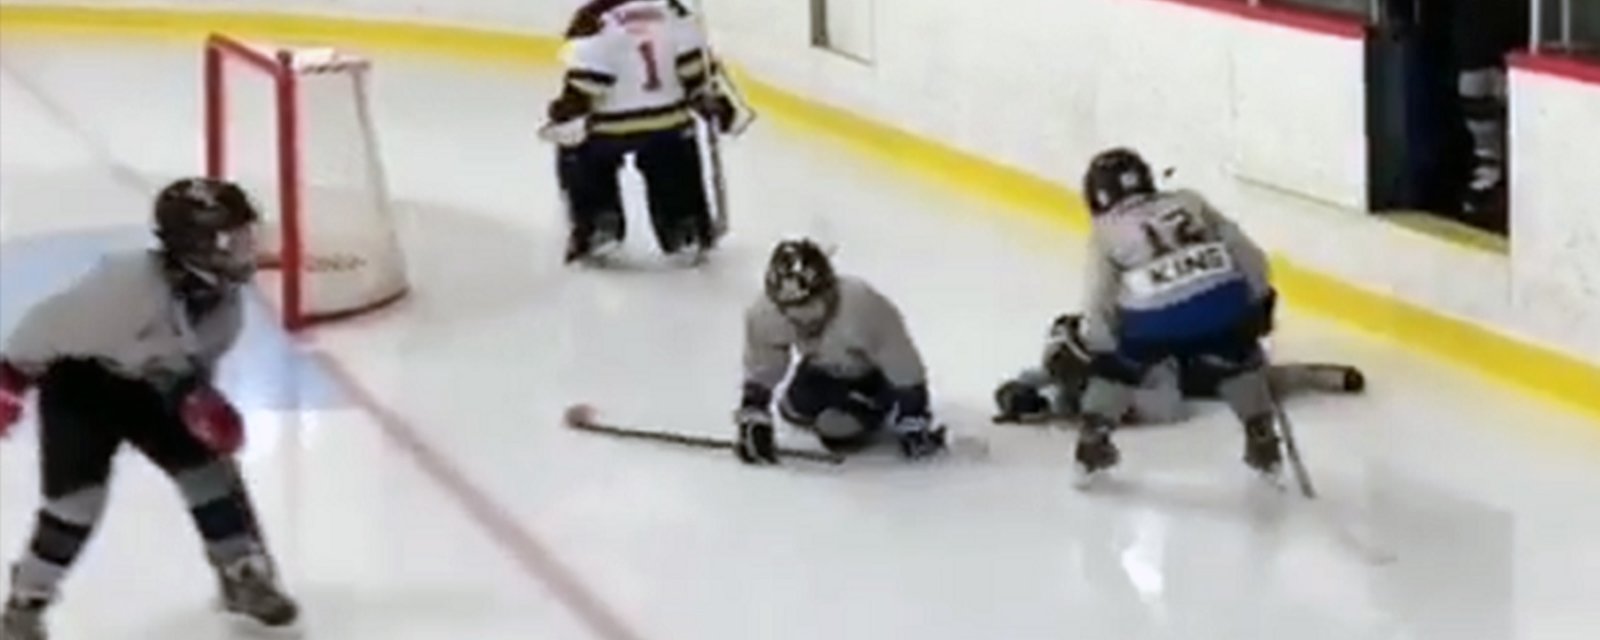 Minor hockey players pile onto the ice in cutest video you’ll see all week